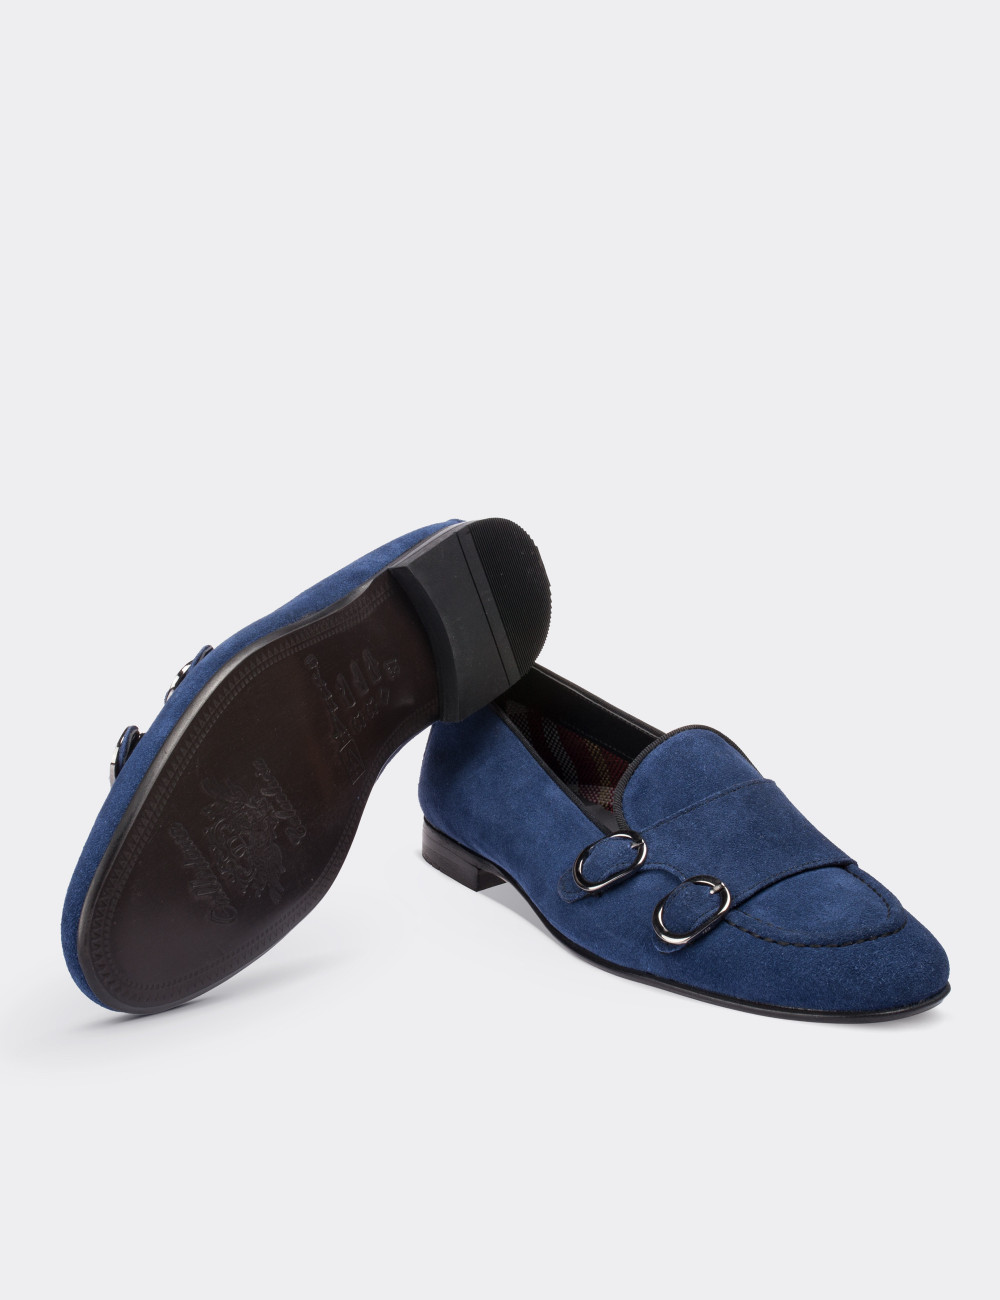 Navy Suede Leather Loafers - 01617ZLCVM01